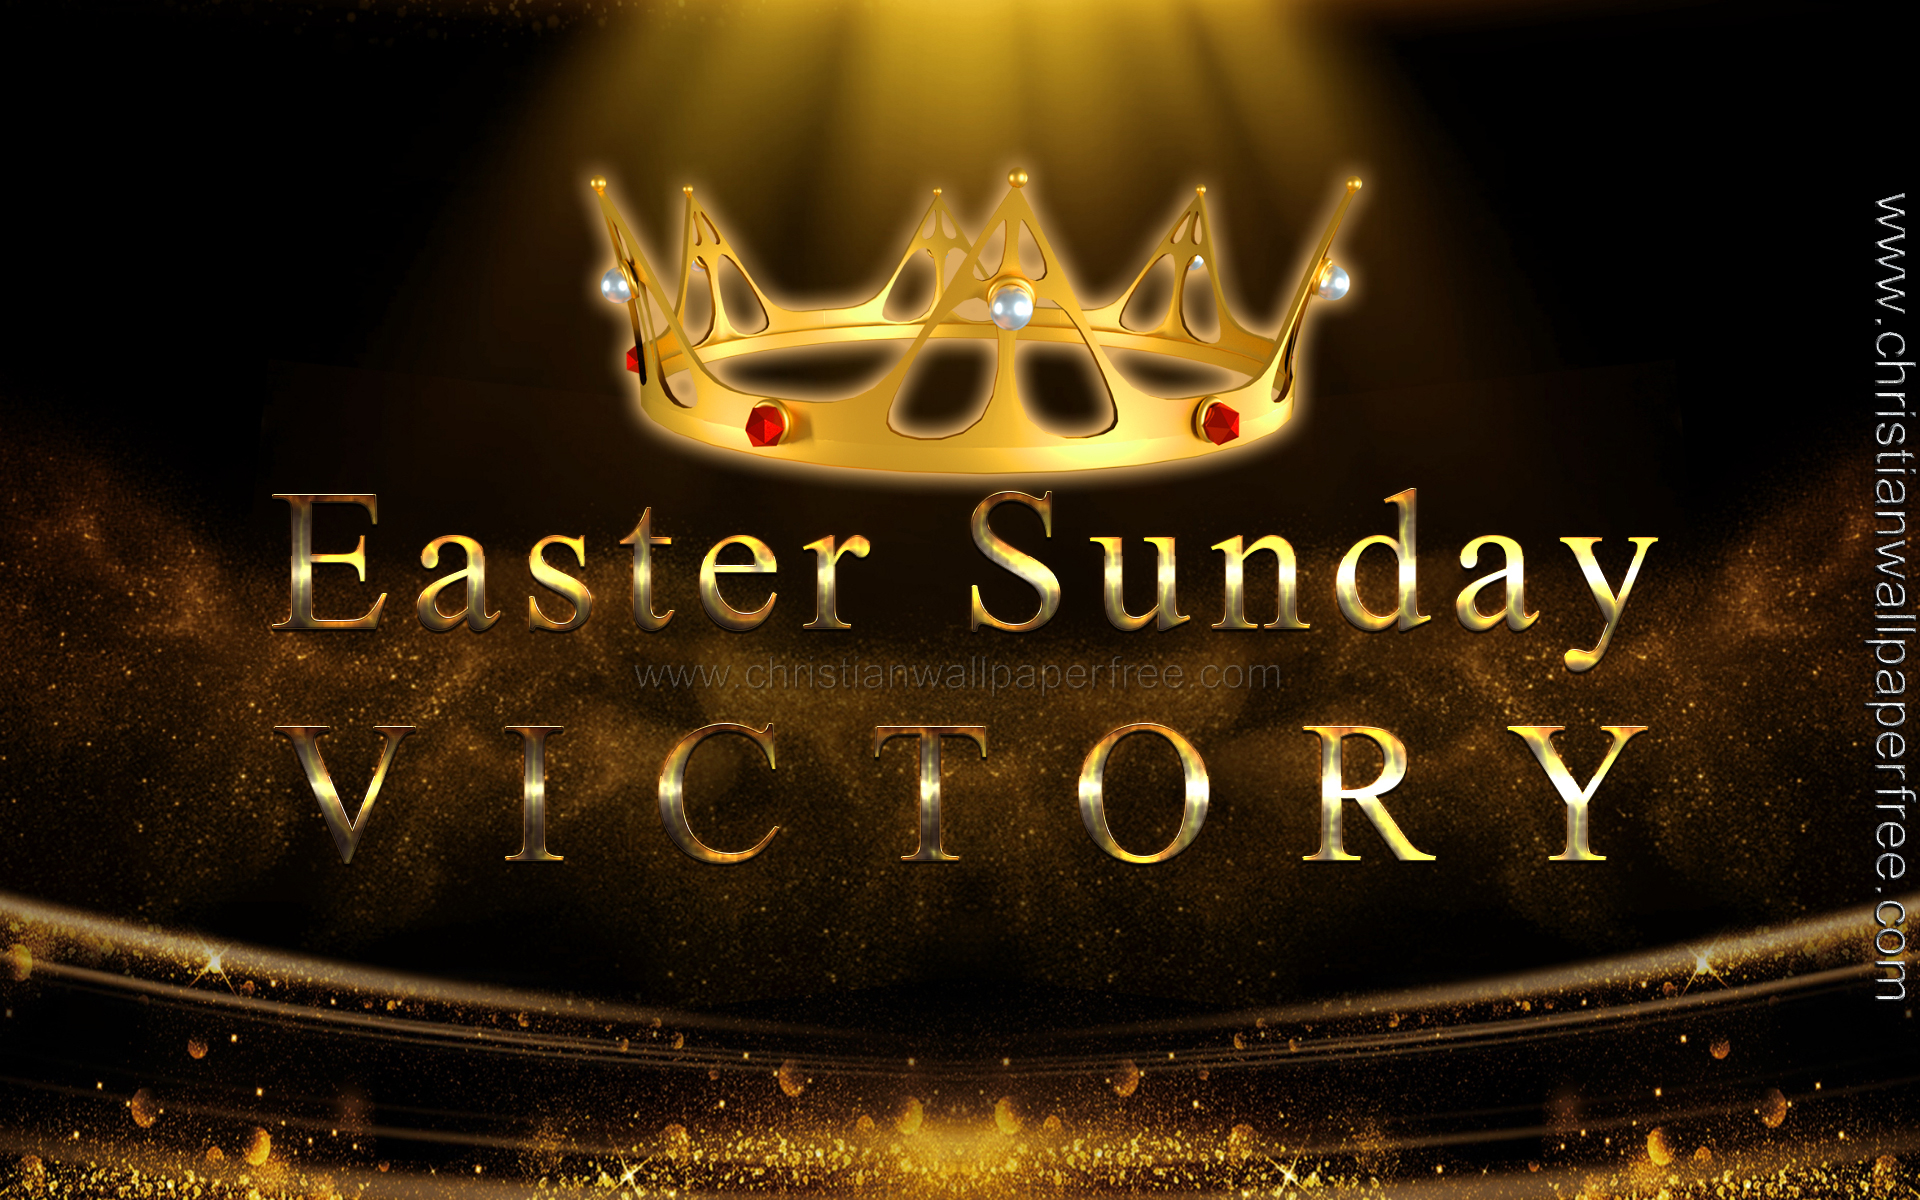 Easter Sunday Victory Christian Wallpaper Free